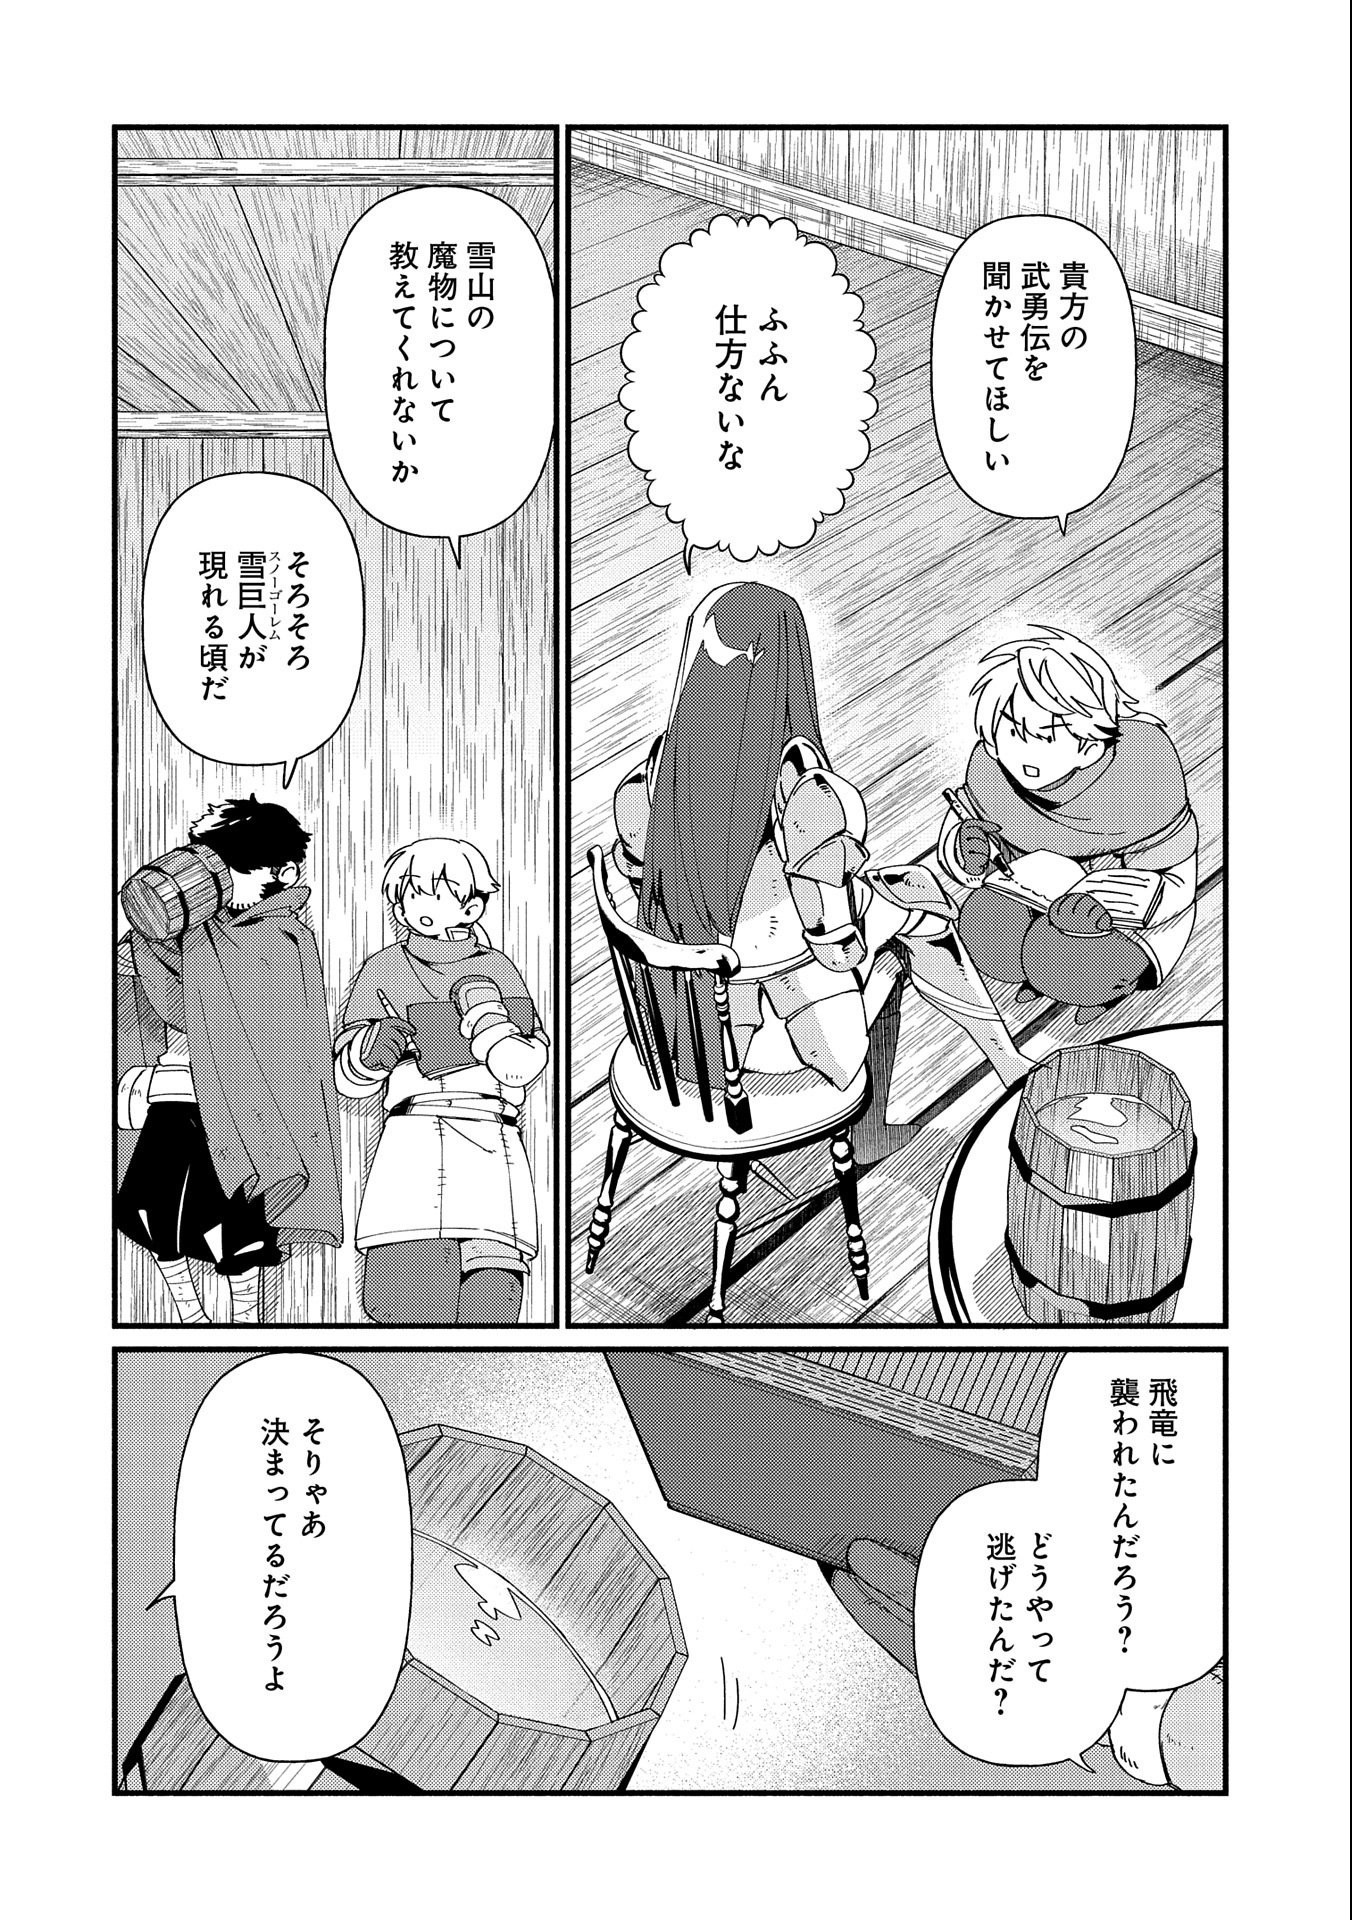 Nord’s Adventure 第10.2話 - Page 2